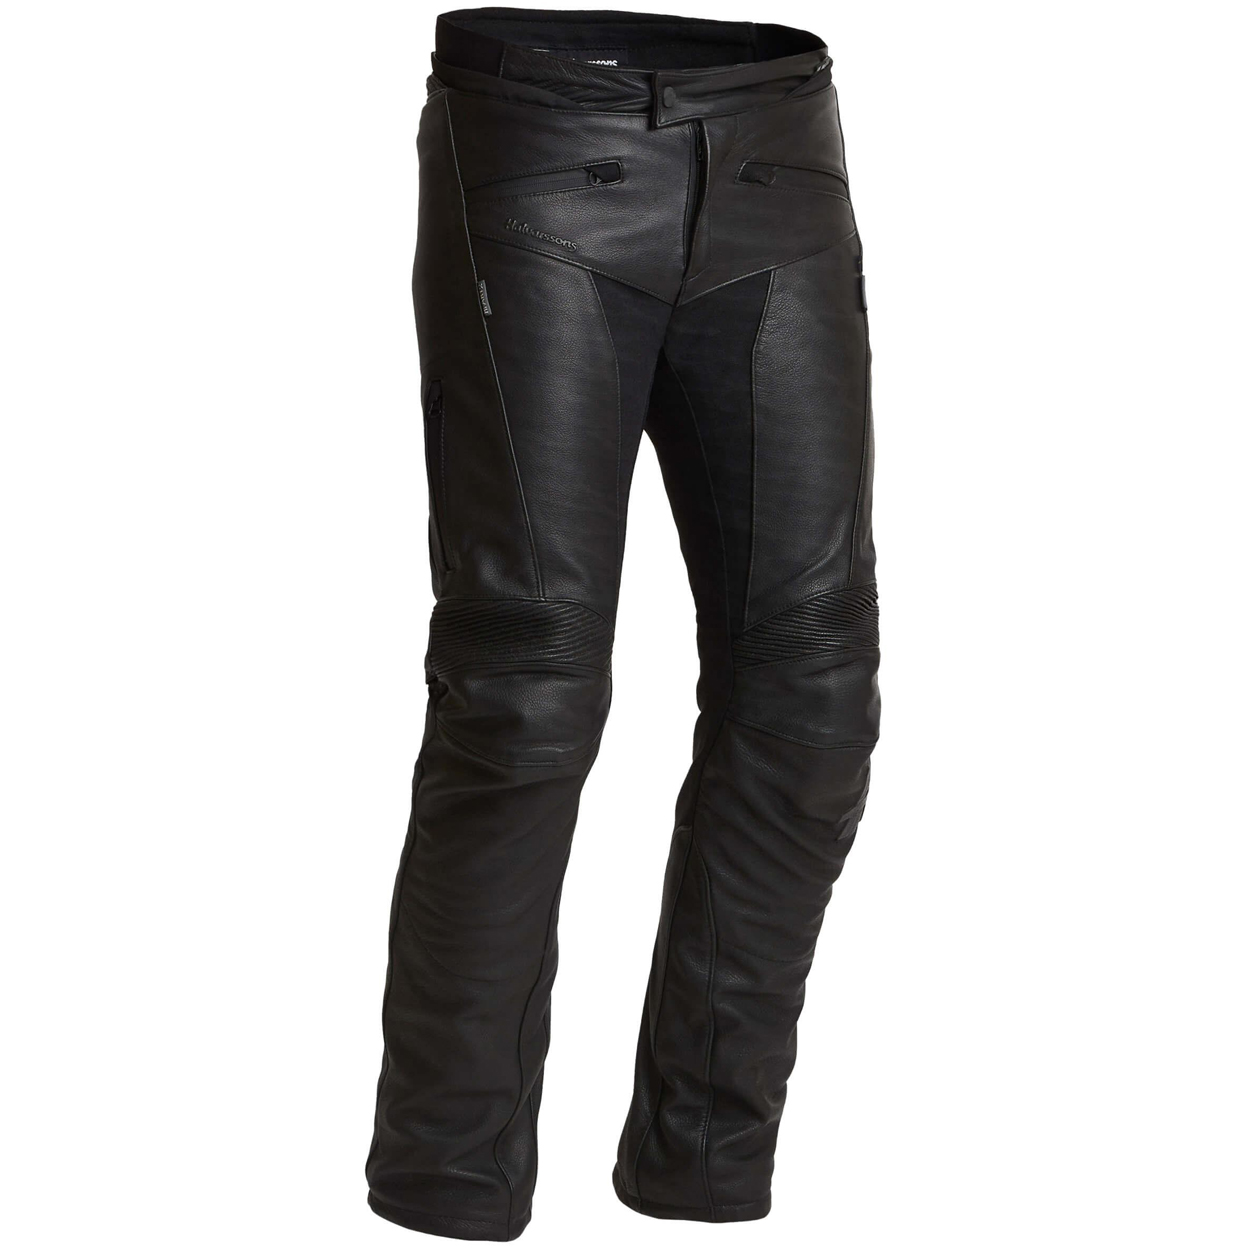 Dainese Leather Motorcycle Trousers with removable braces  5175  Leather  motorcycle pants Motorcycle wear Biker leather